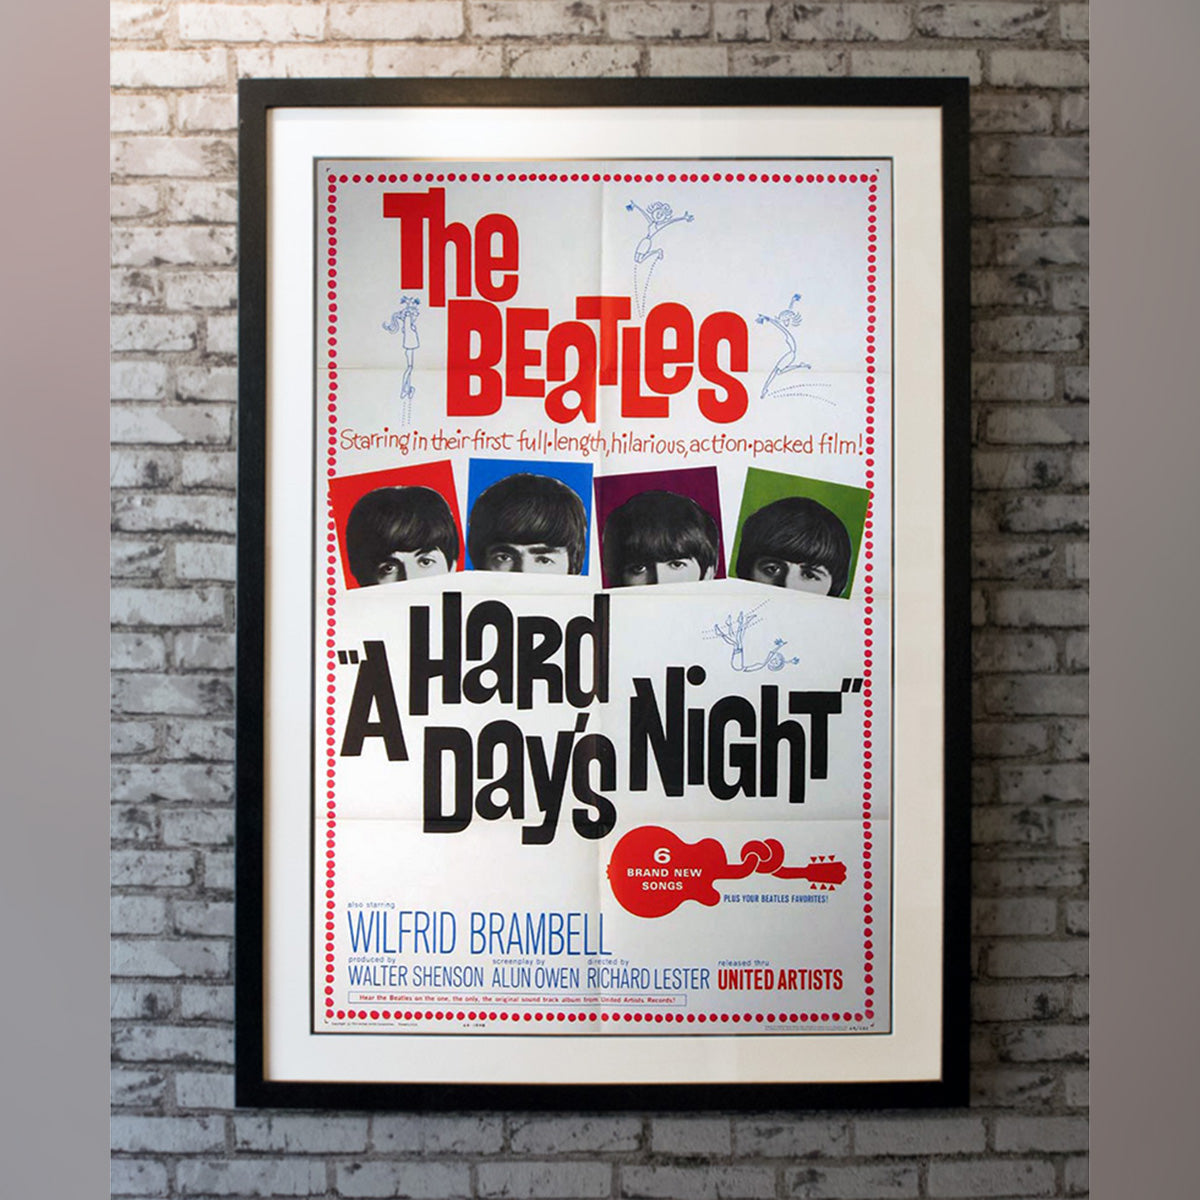 Original Movie Poster of A Hard Day's Night (1964)